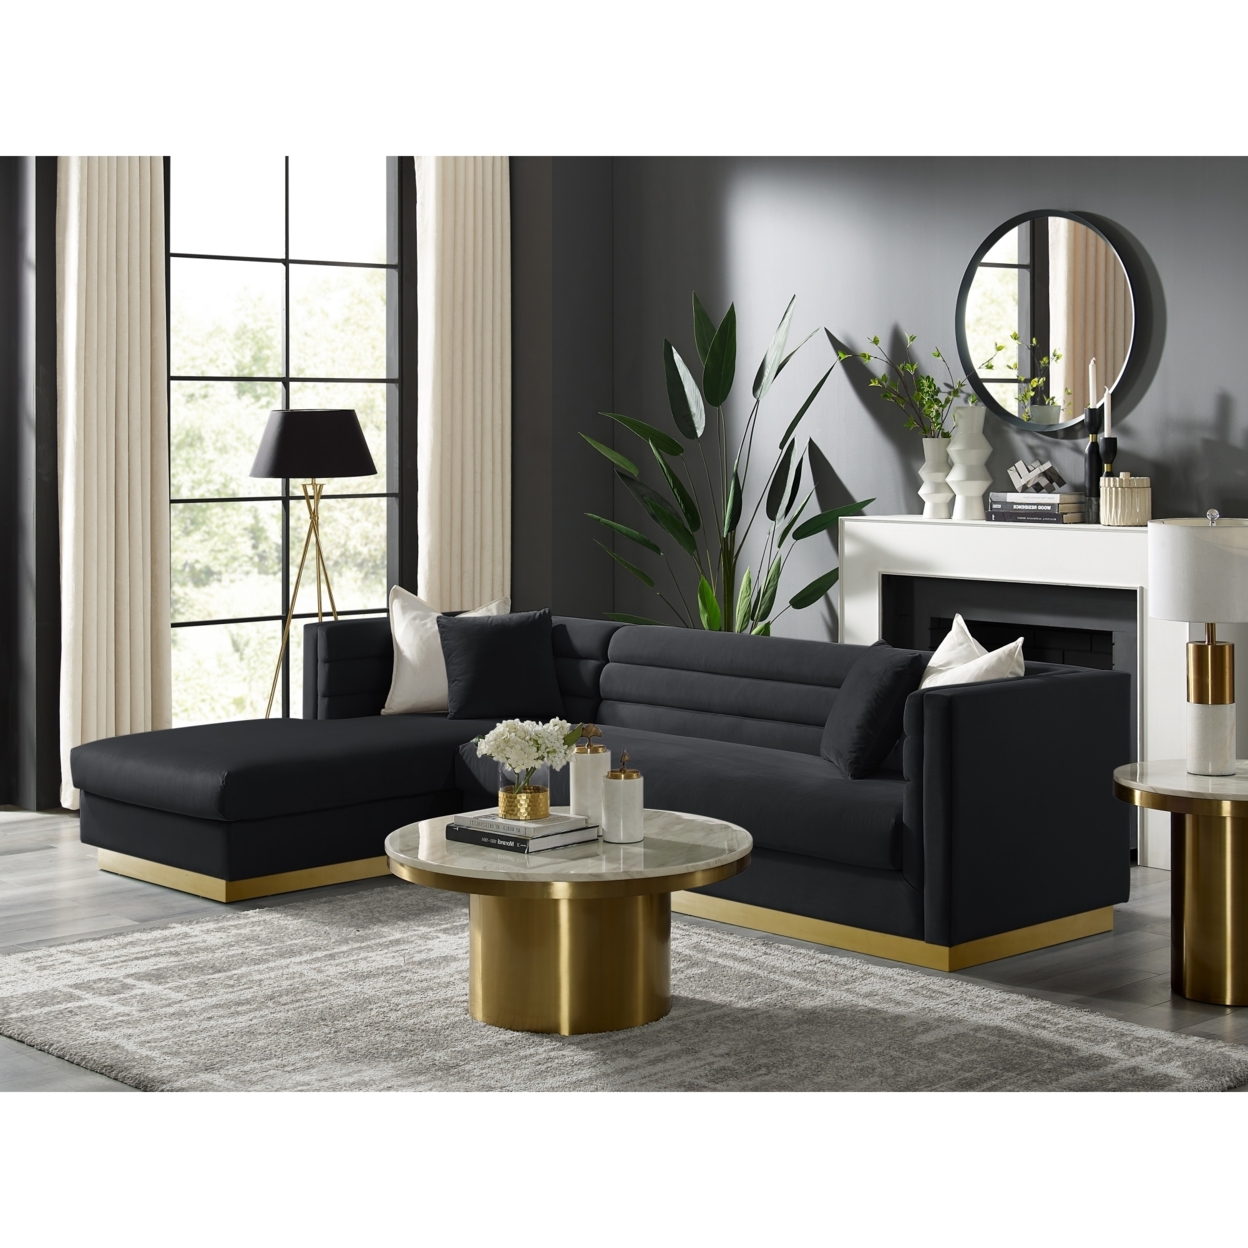 Aja Sofa-Upholstered-Sectional-Metal Base, Square Arms-Horizontal Channel Tufting - black